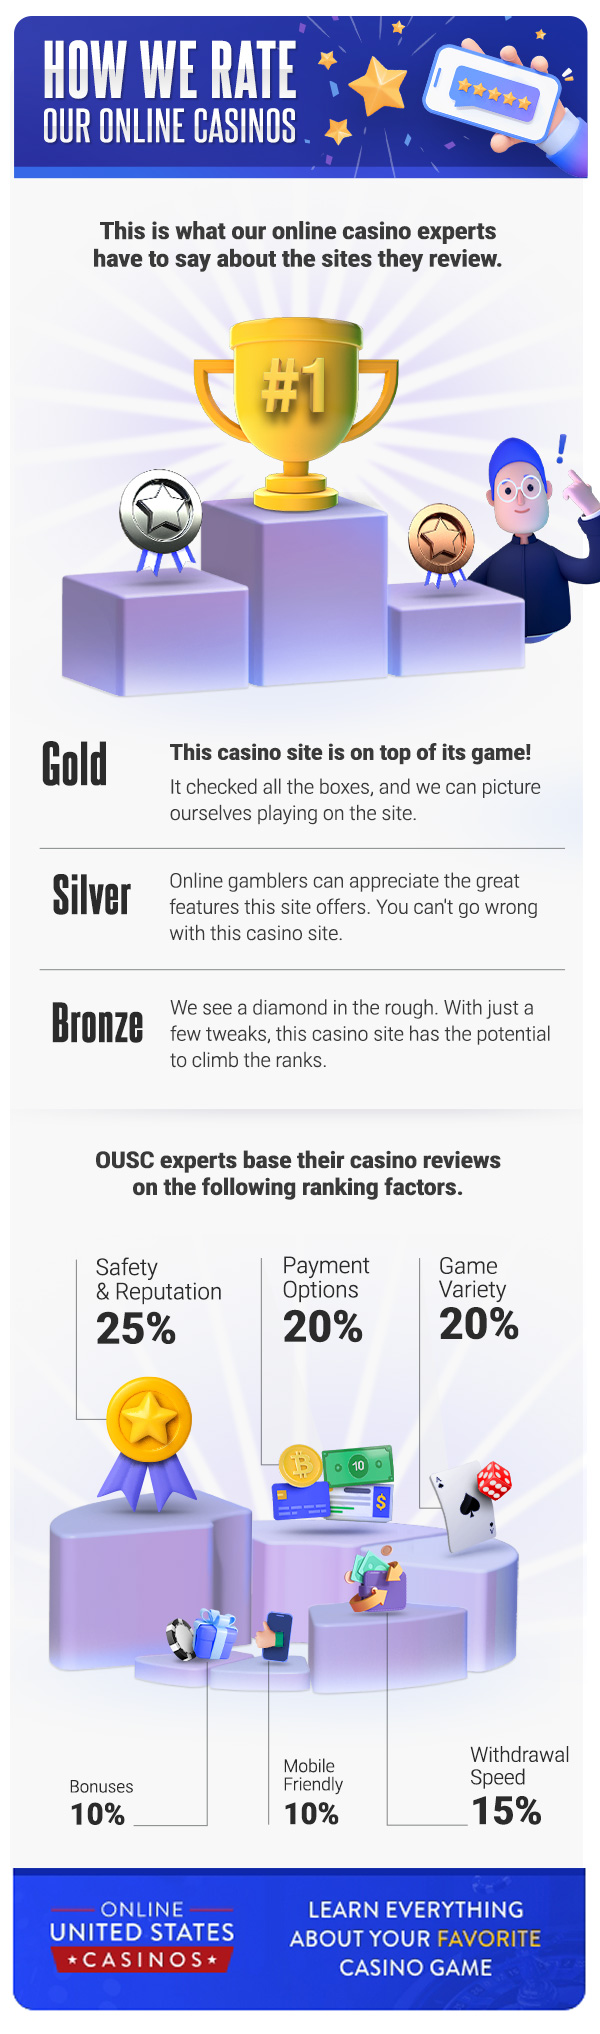 How We Rate Online Casinos Infographic Mobile